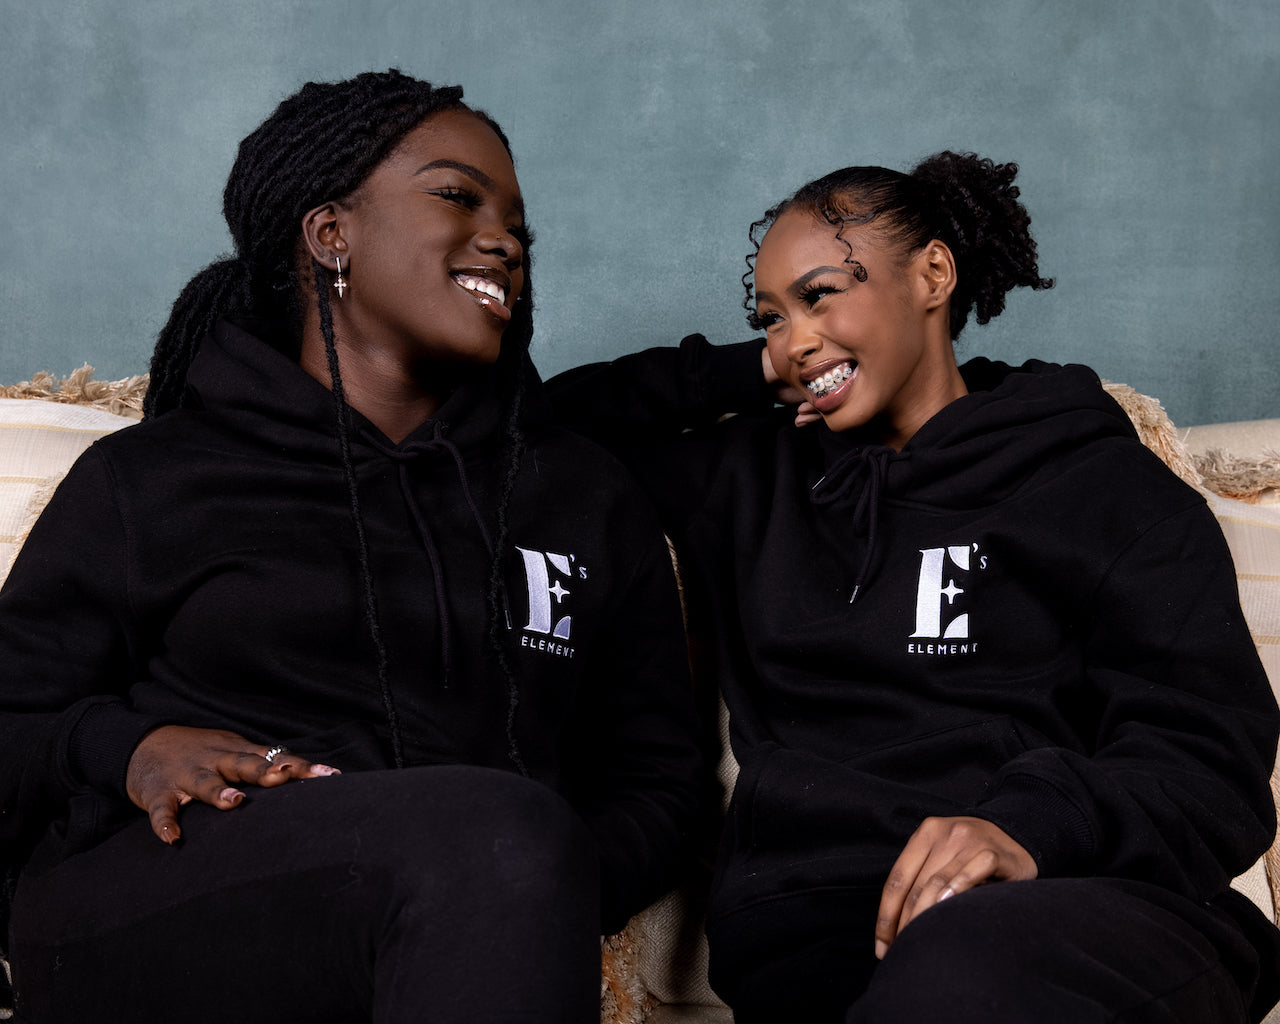 Go through the holiday gift guide to learn more. The E's Element Smokey Black Sweatsuit set is among the many perfect gifts this holiday. 